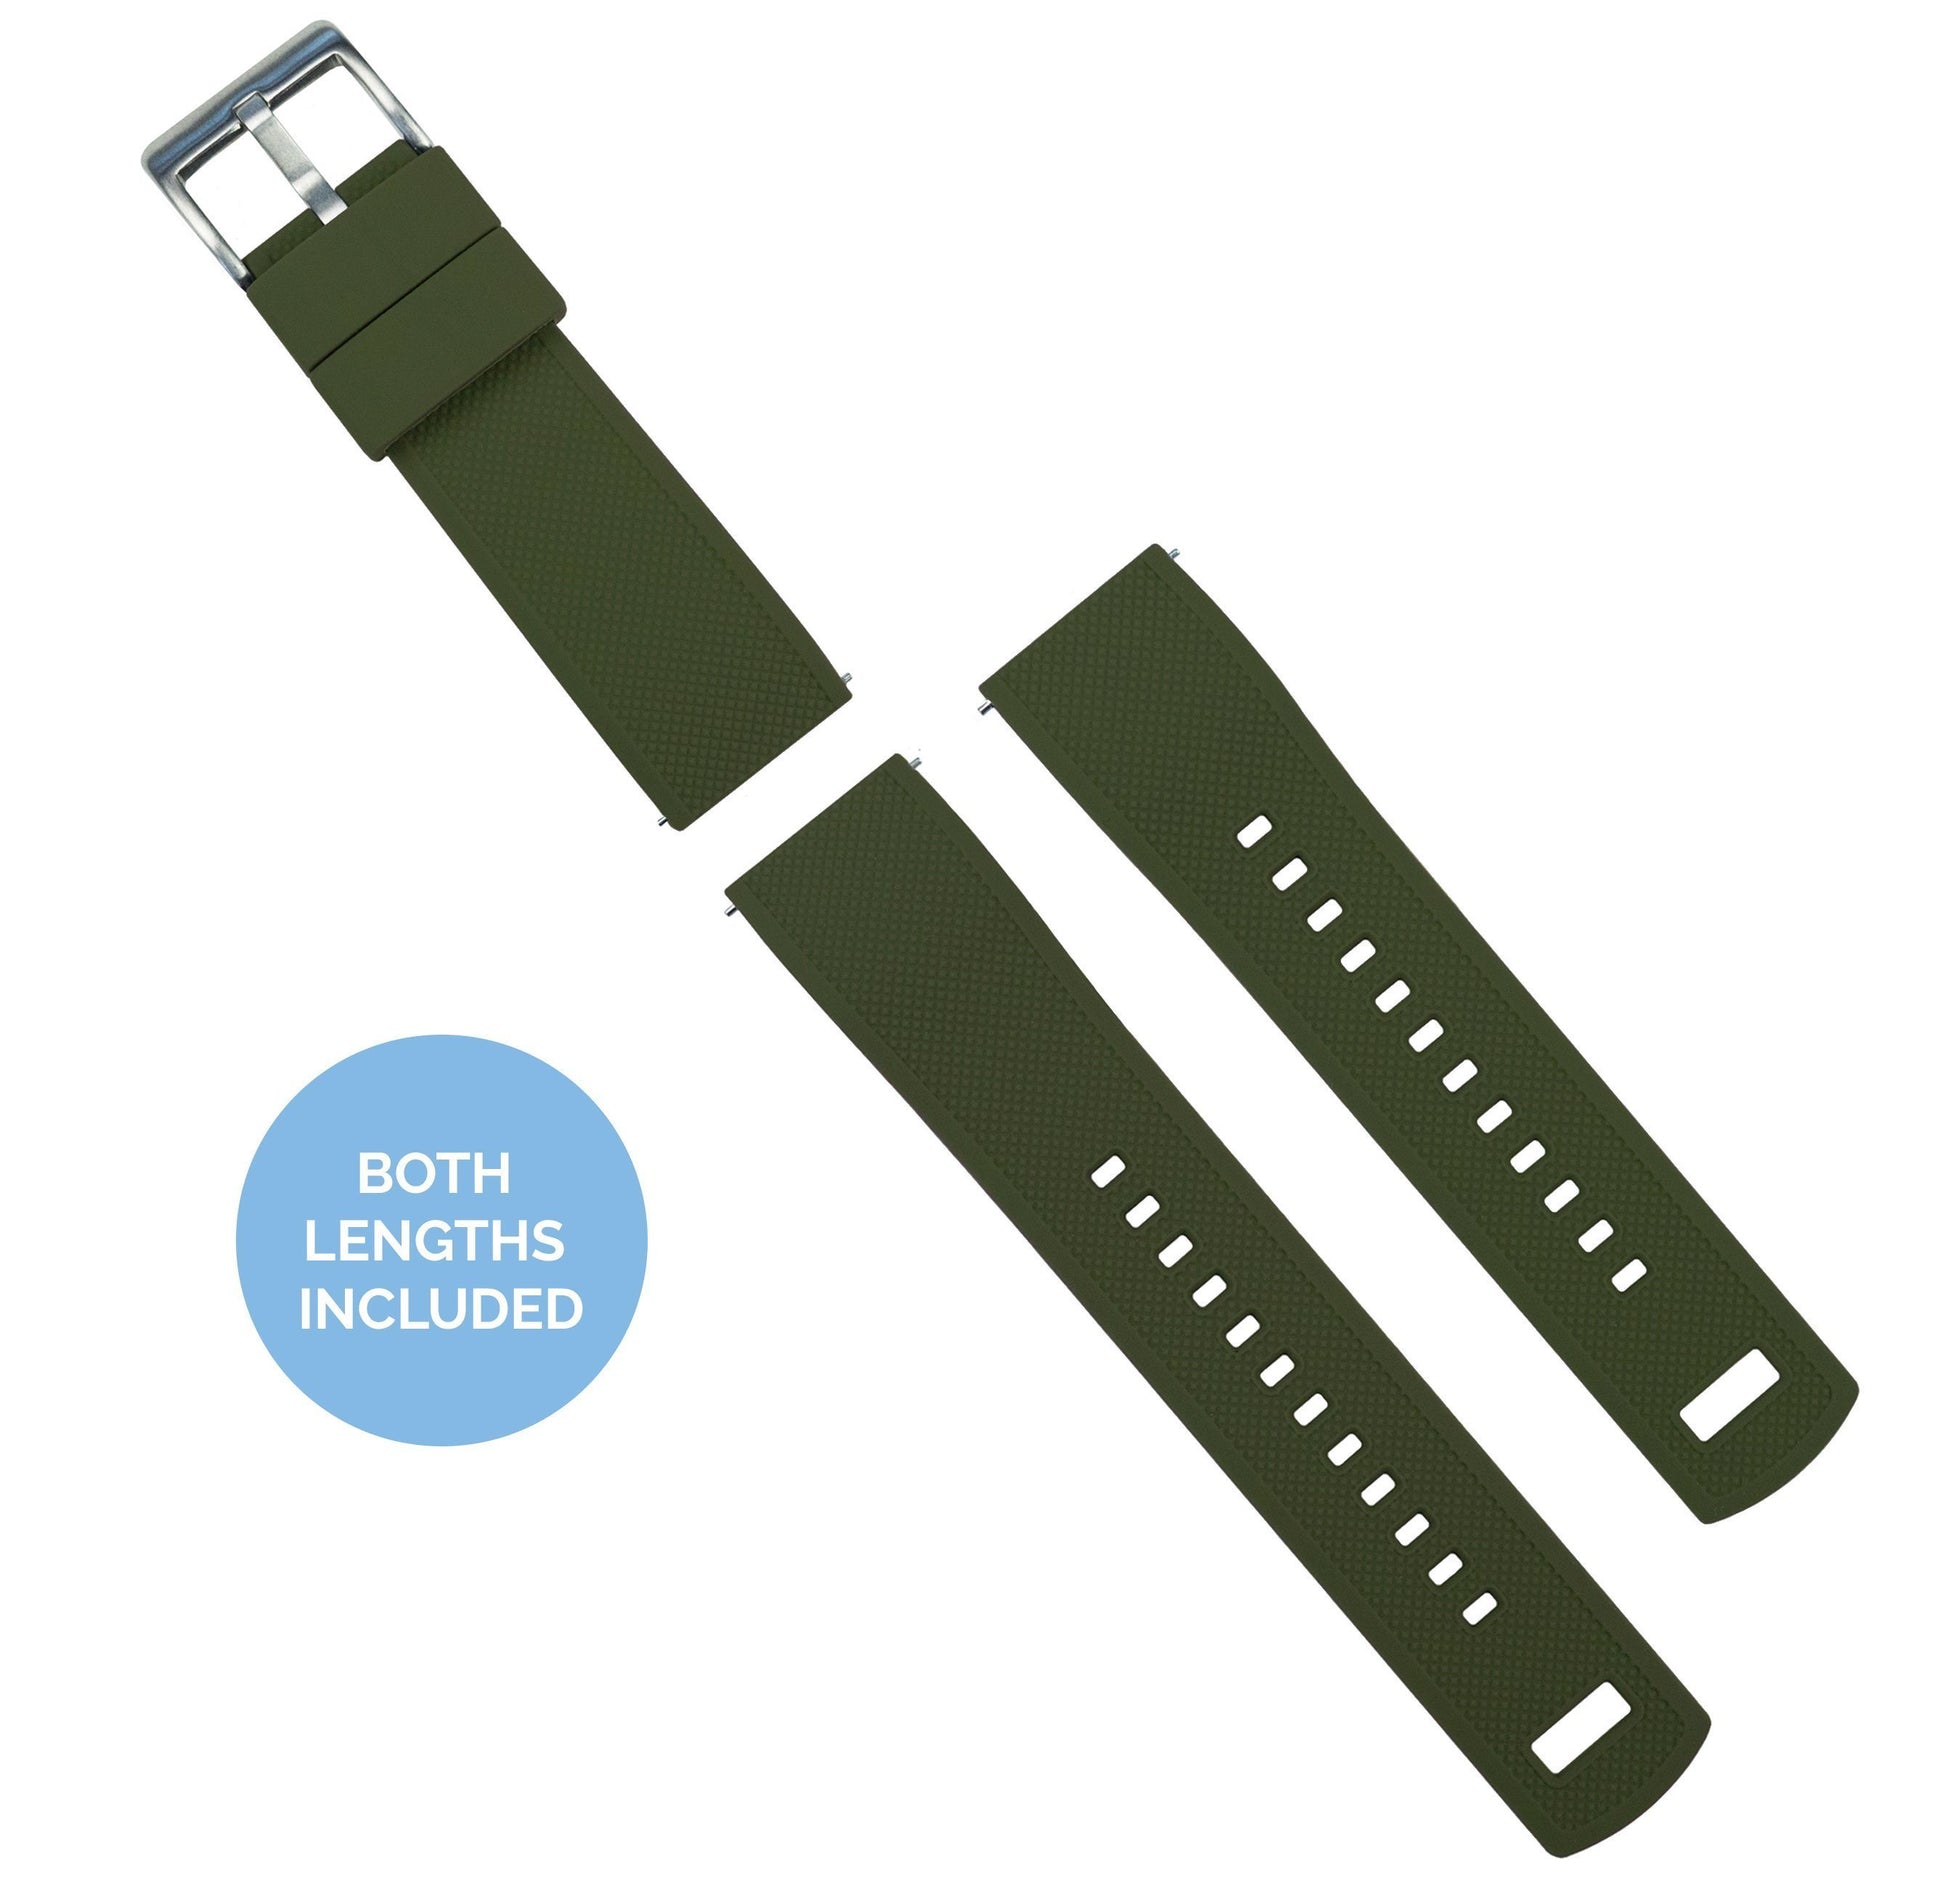 Gear S3 Classic & Frontier | Elite Silicone | Army Green Top / Black Bottom - Barton Watch Bands